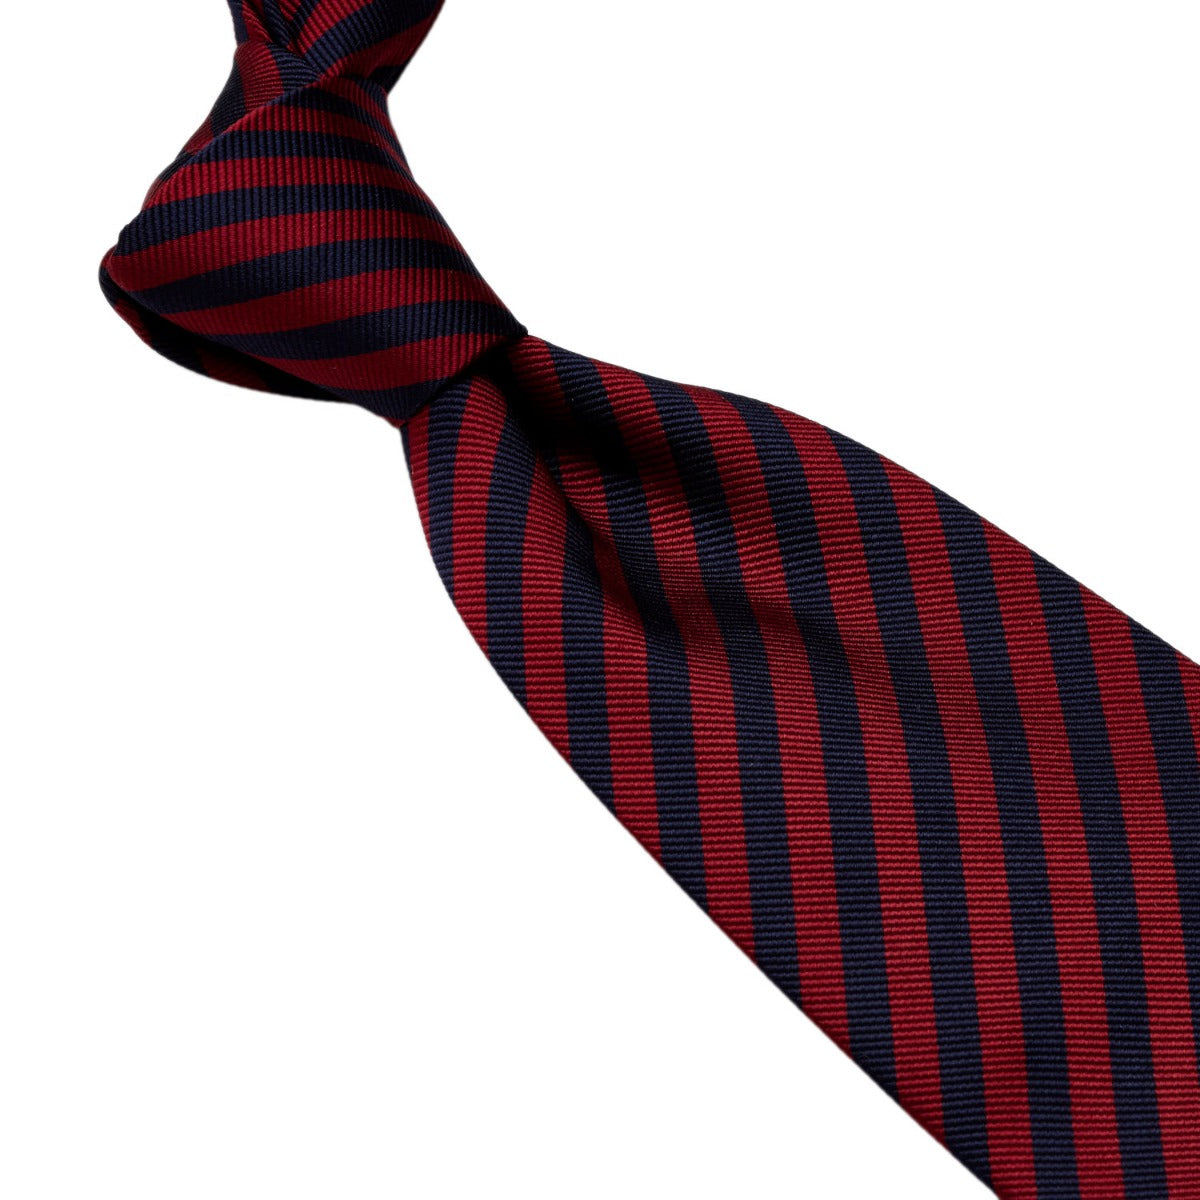 A red and black striped KirbyAllison.com Sovereign Grade Navy and Red London Stripe Silk Tie handmade in the United Kingdom, showcasing quality craftsmanship.